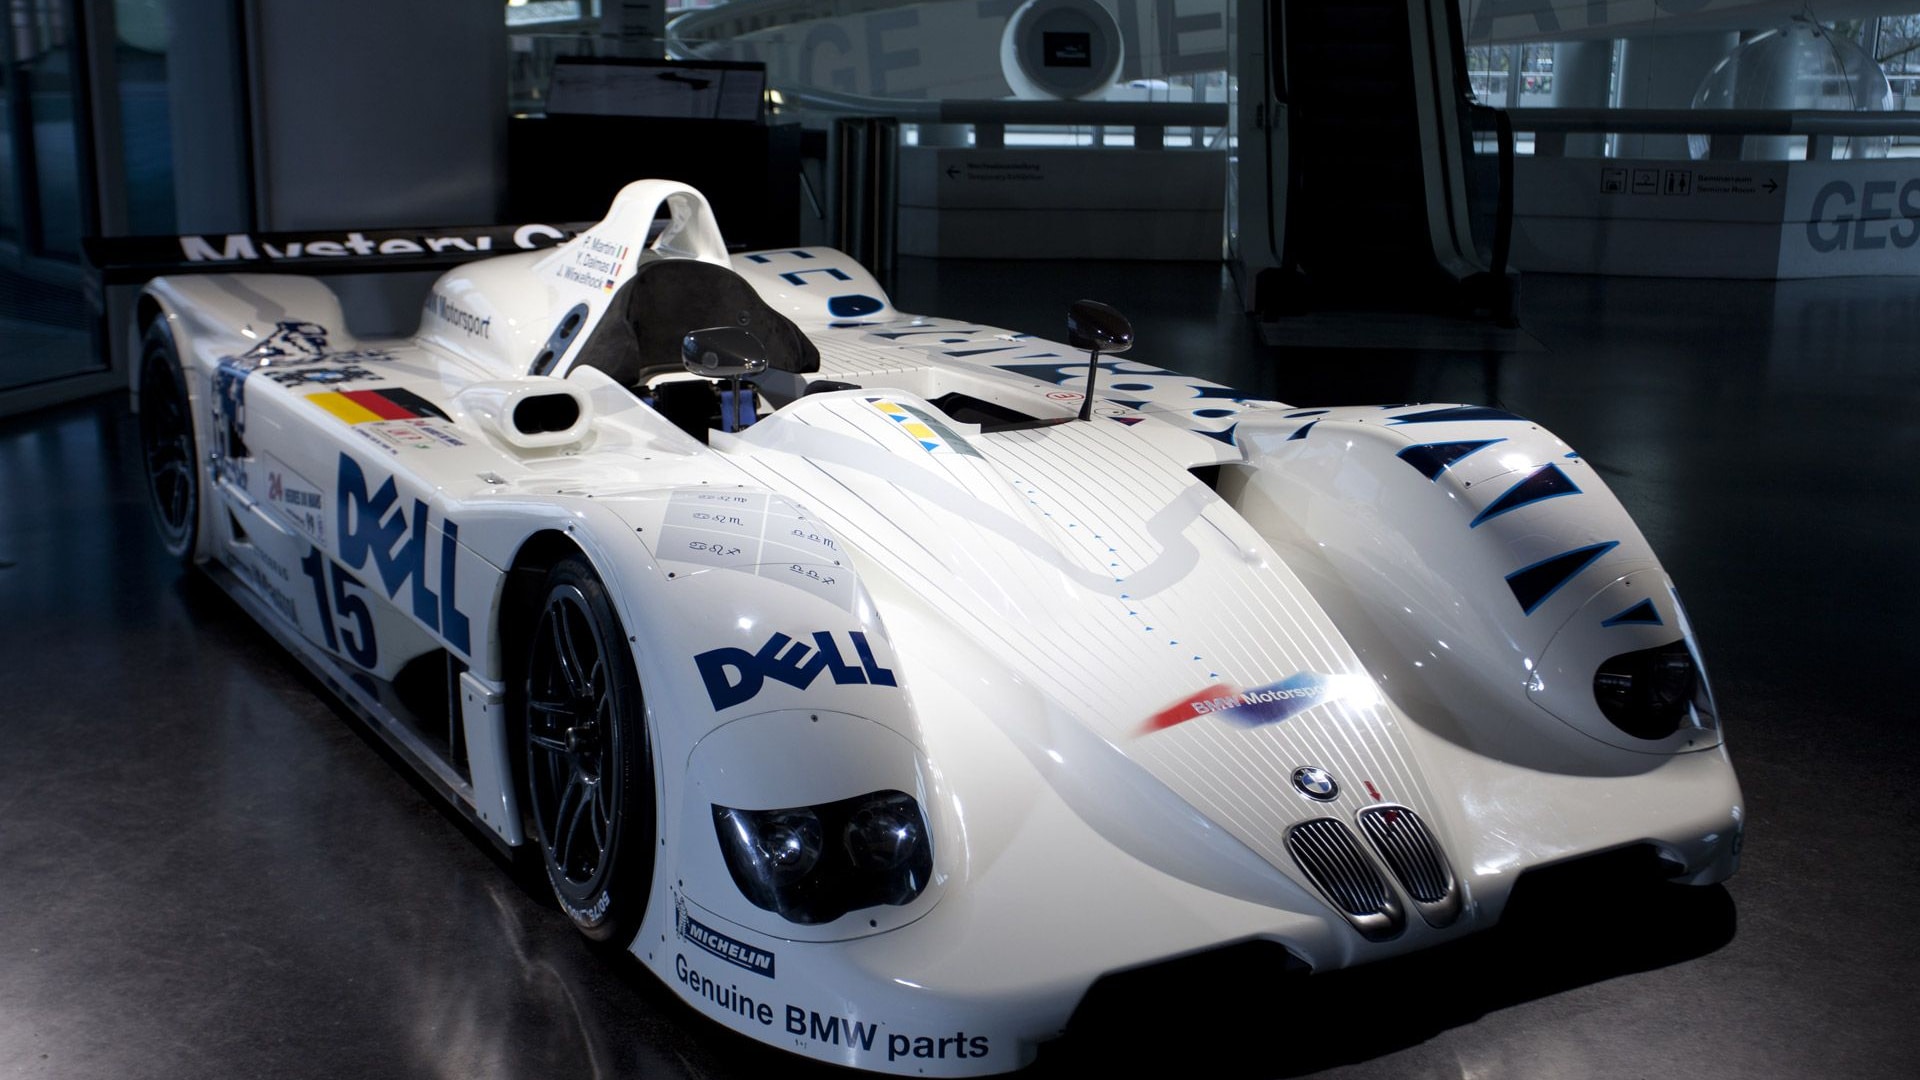 BMW V12 LMR that won overall in the 1999 24 Hours of Le Mans